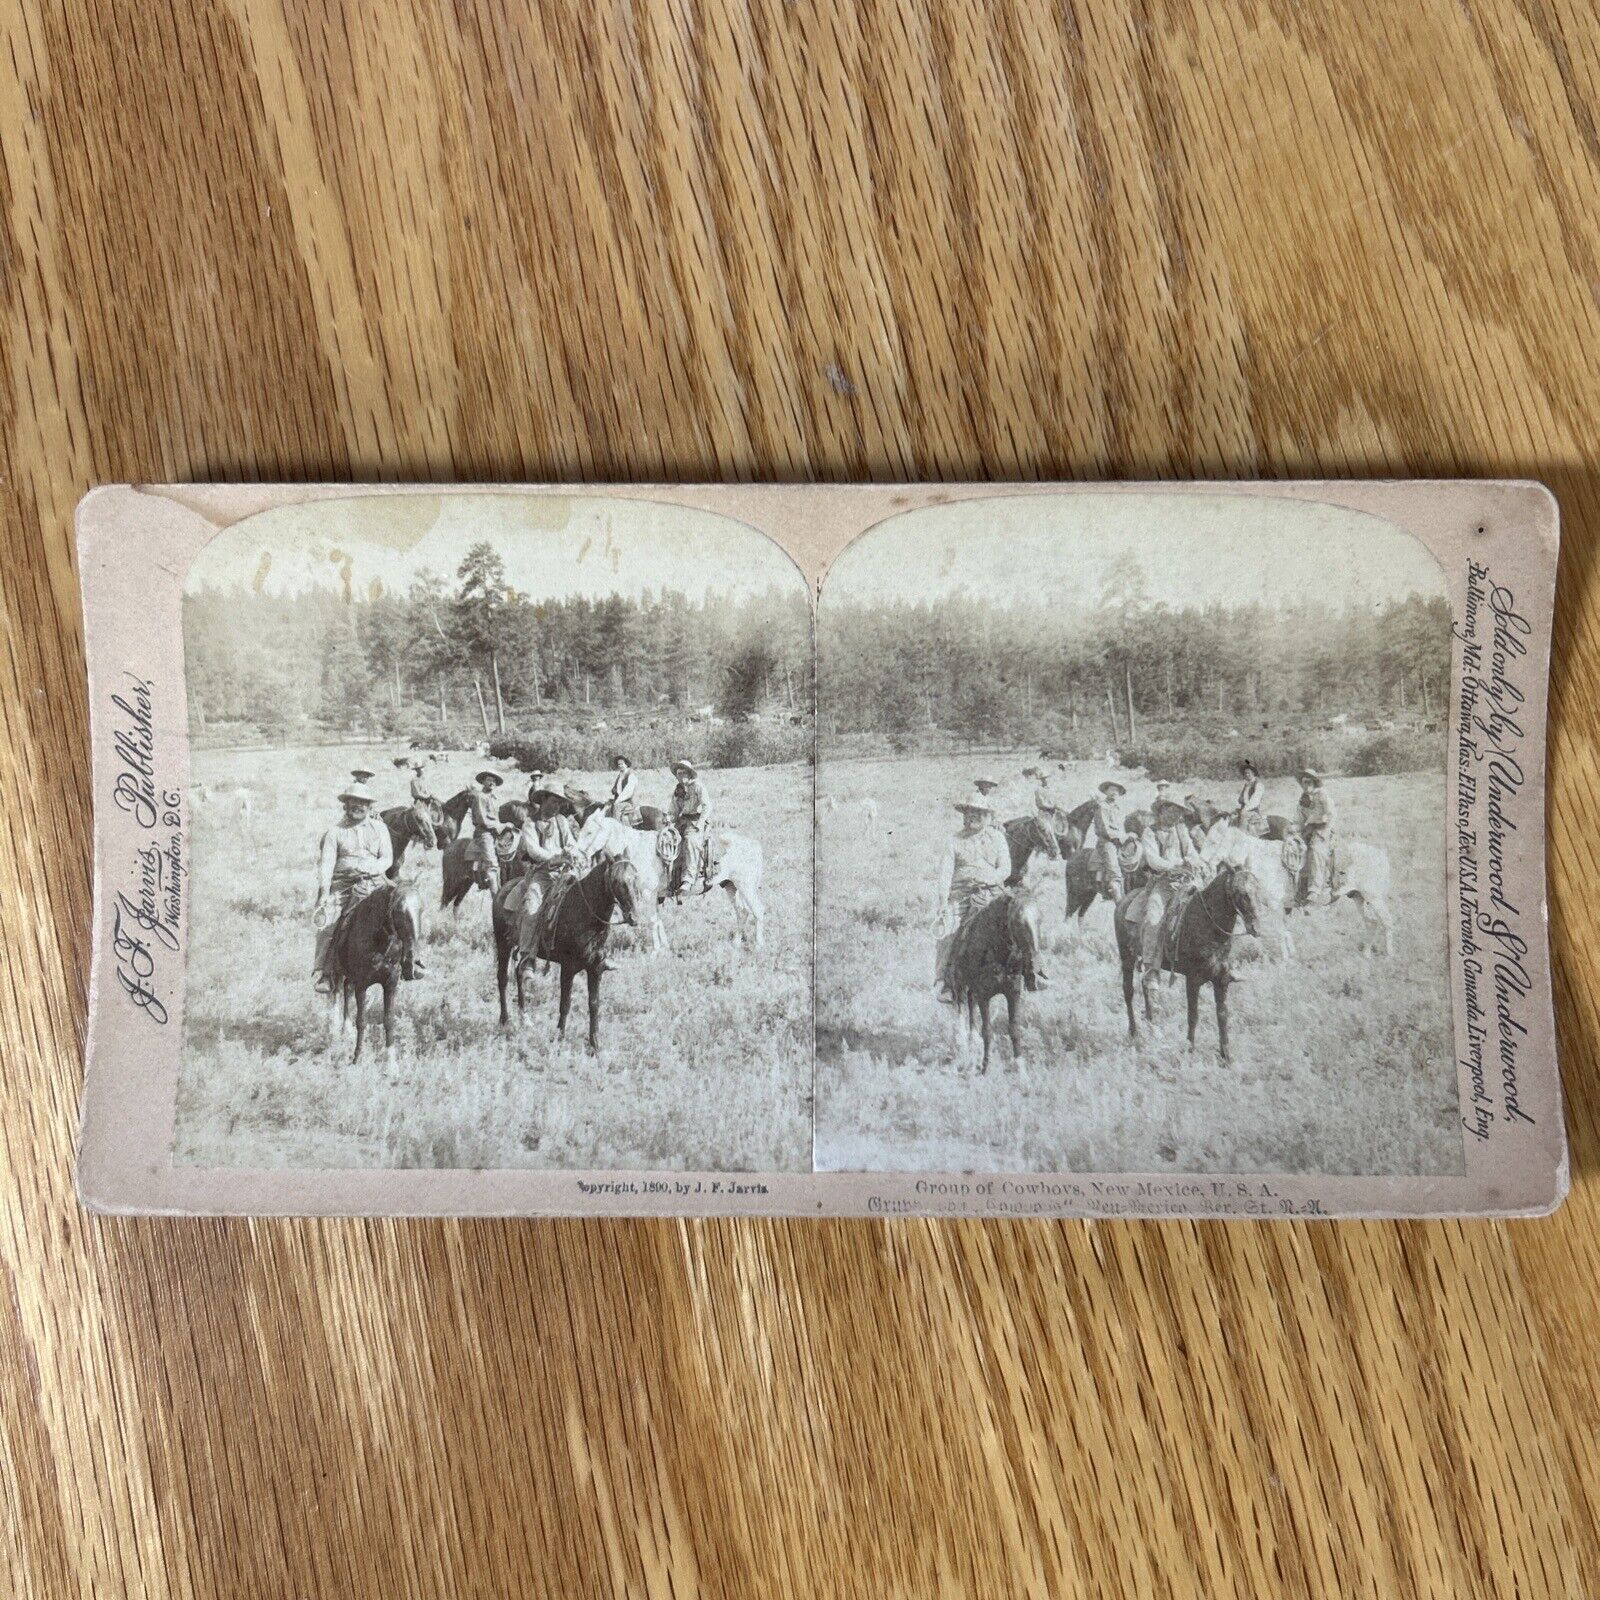 Antique Stereoscope Card Cowboys Photo Wild West 1890 New Mexico 3D Stereograph